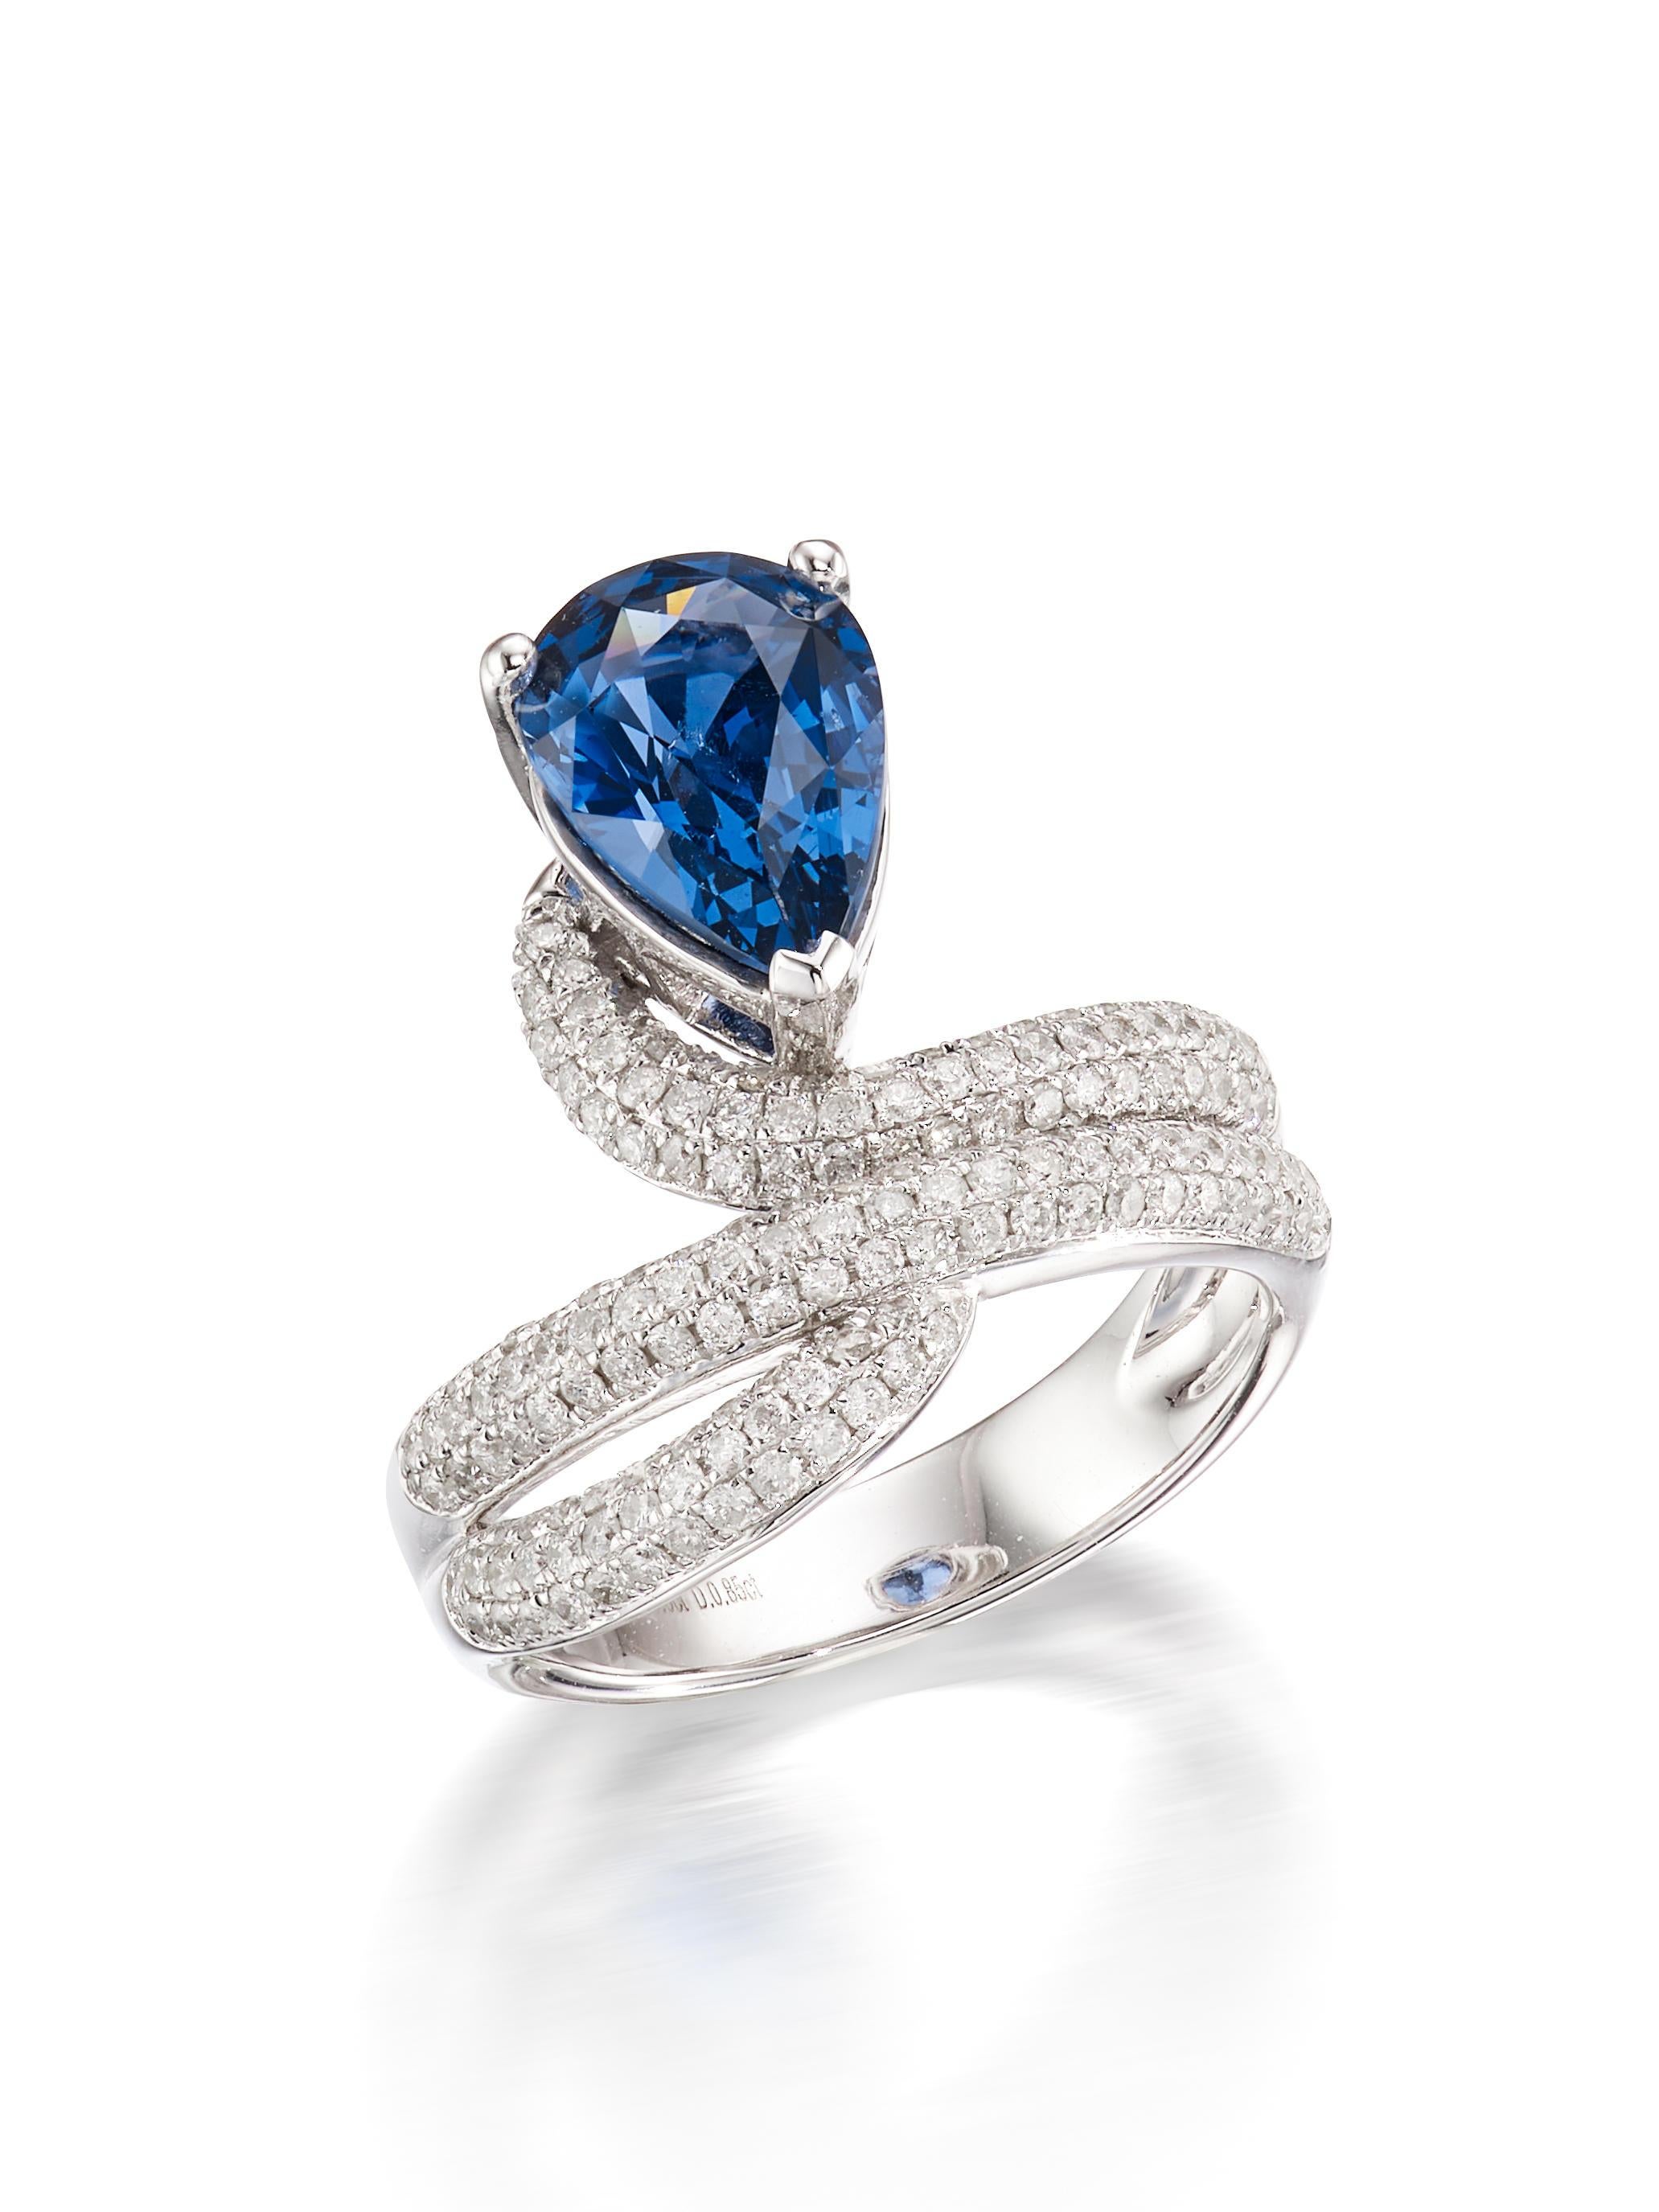 Among all Rare Blue Gemstones, the Cobalt Spinel possesses unique beauty factors such as sparkle, brilliance, unparalleled color tone and other physical and chemical properties. The ratio of the size, quantity and demand for Cobalt Blue Spinel is